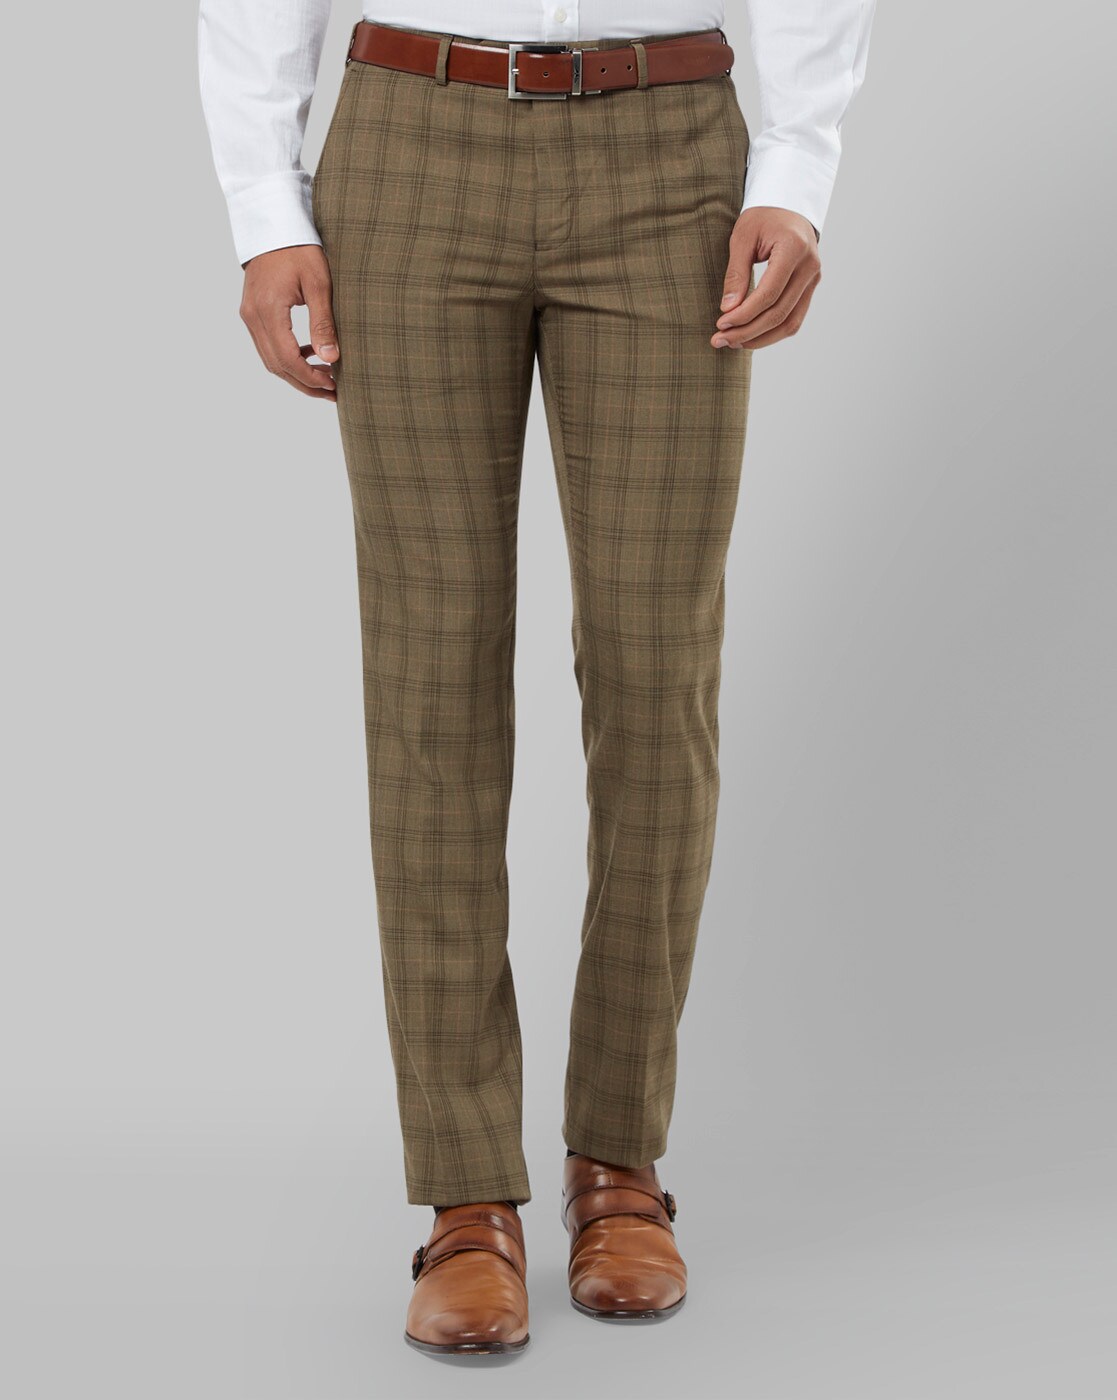 Buy Brown Slim Fit Plaid Pants by GentWithcom with Free Shipping